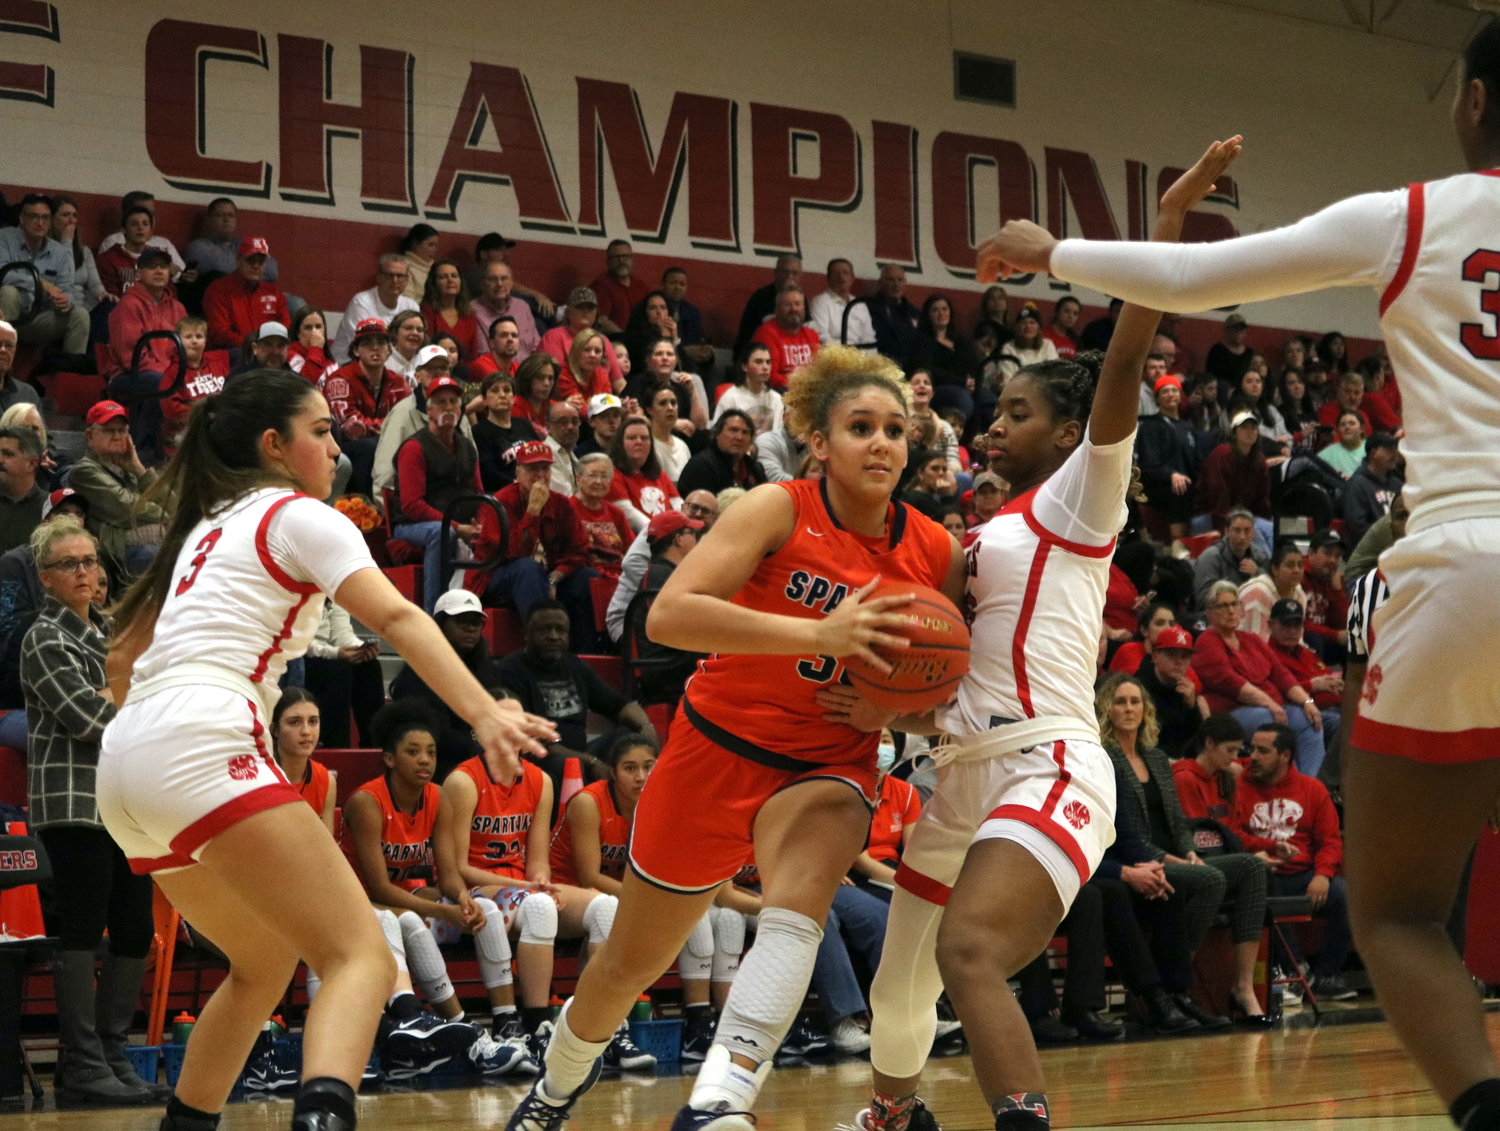 Seven Lakes drives past two defenders during Friday's game between Seven Lakes and Katy at the Katy gym.